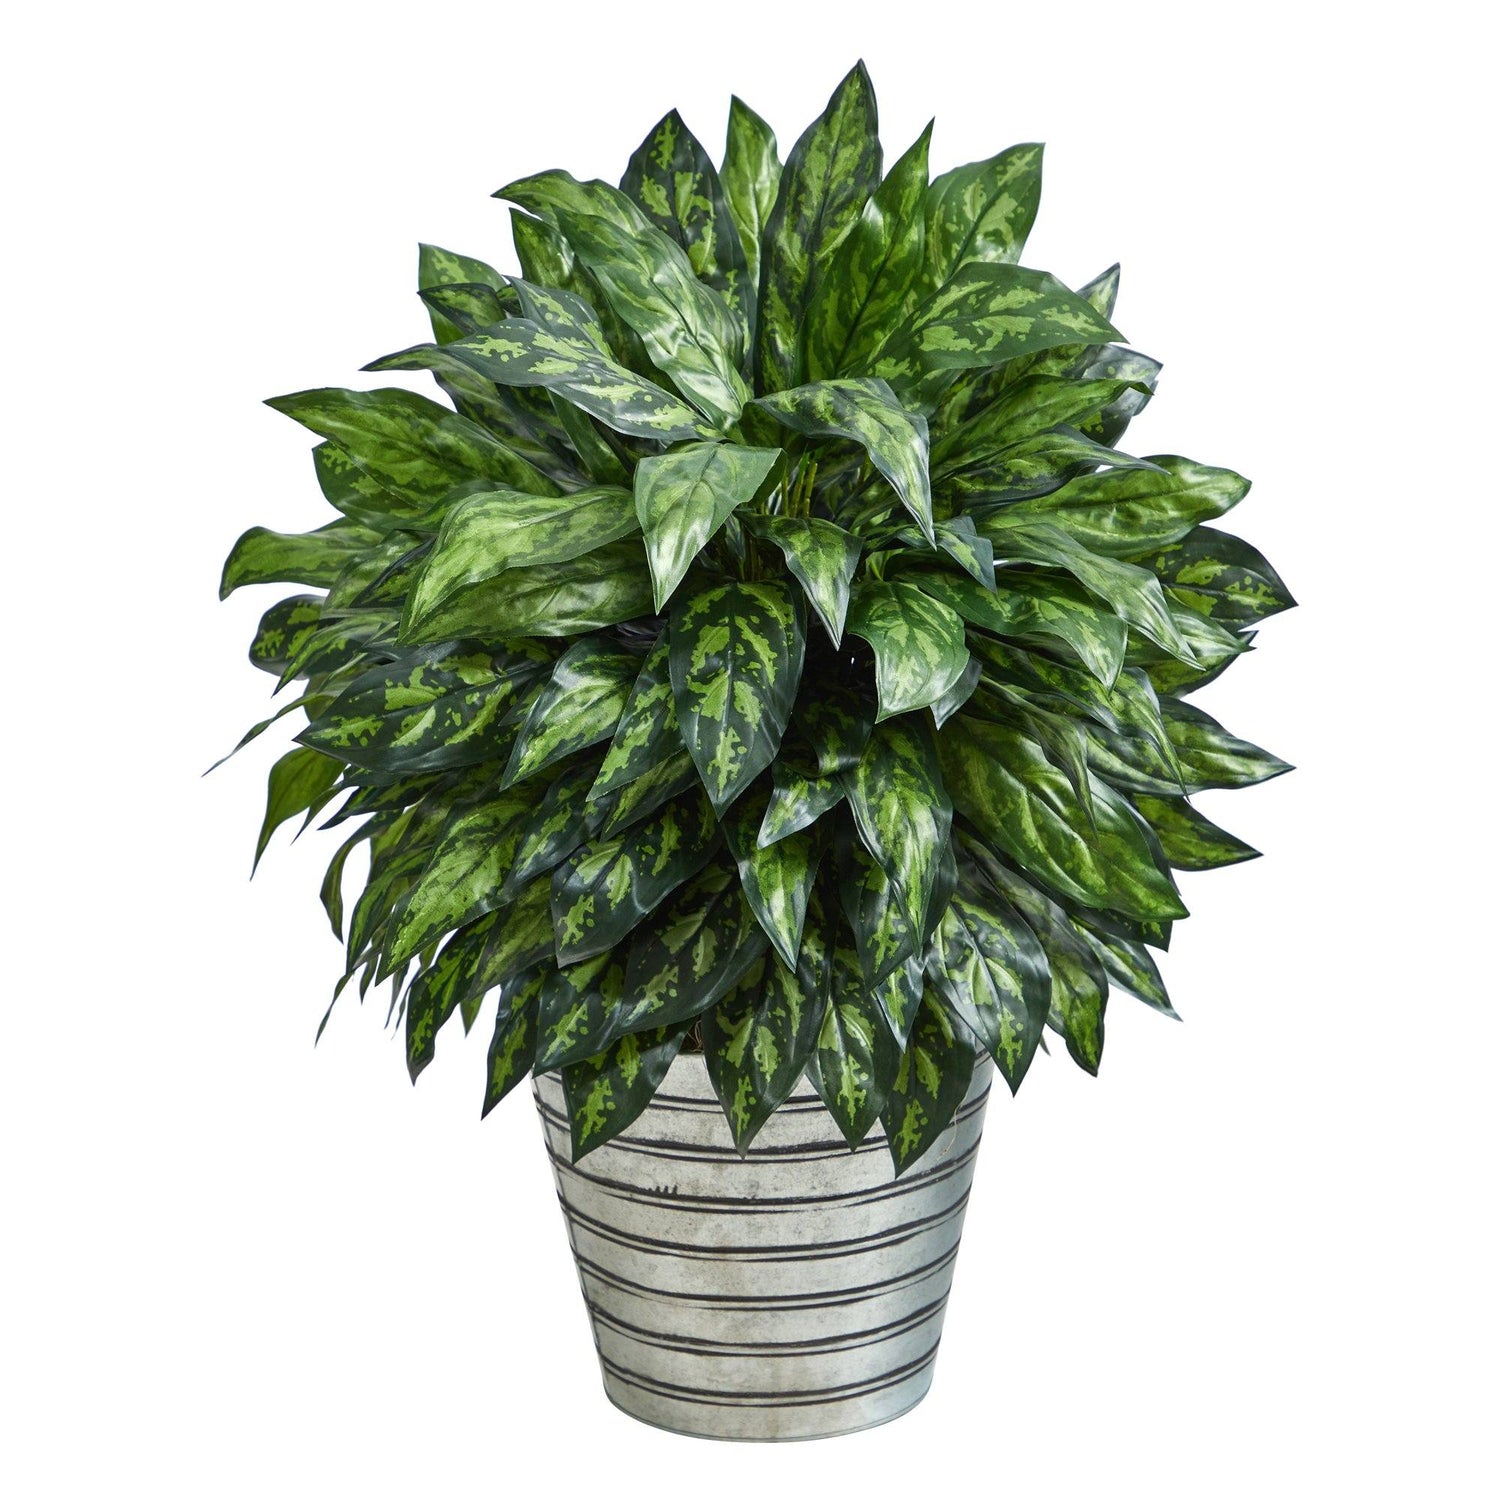 34” Silver King Artificial Plant in Decorative Tin Bucket